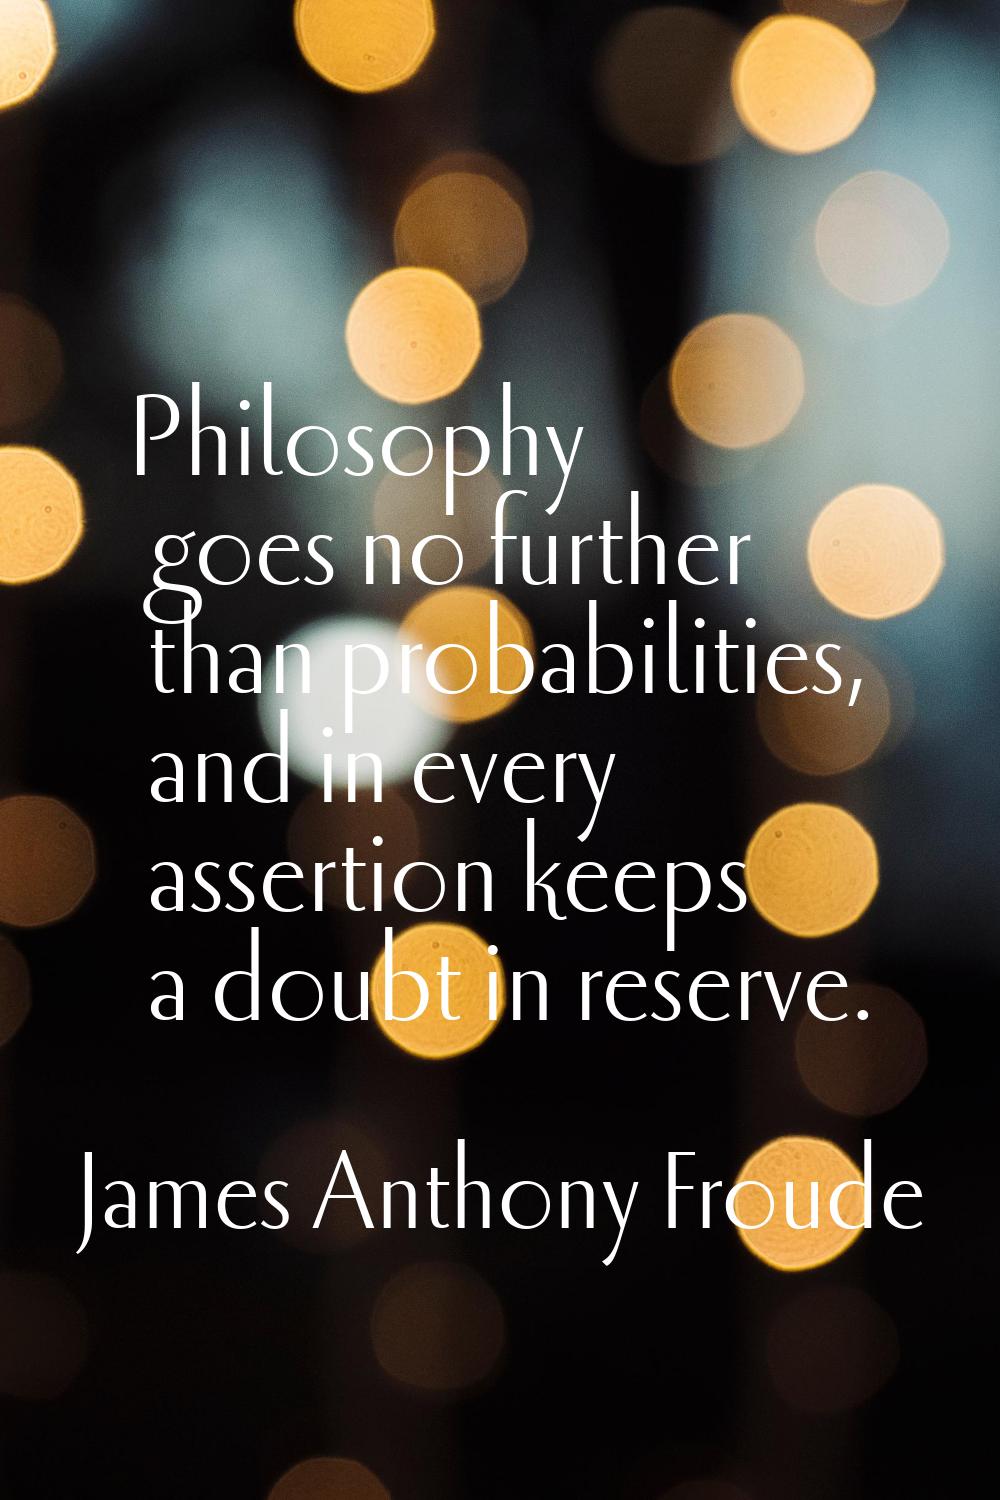 Philosophy goes no further than probabilities, and in every assertion keeps a doubt in reserve.